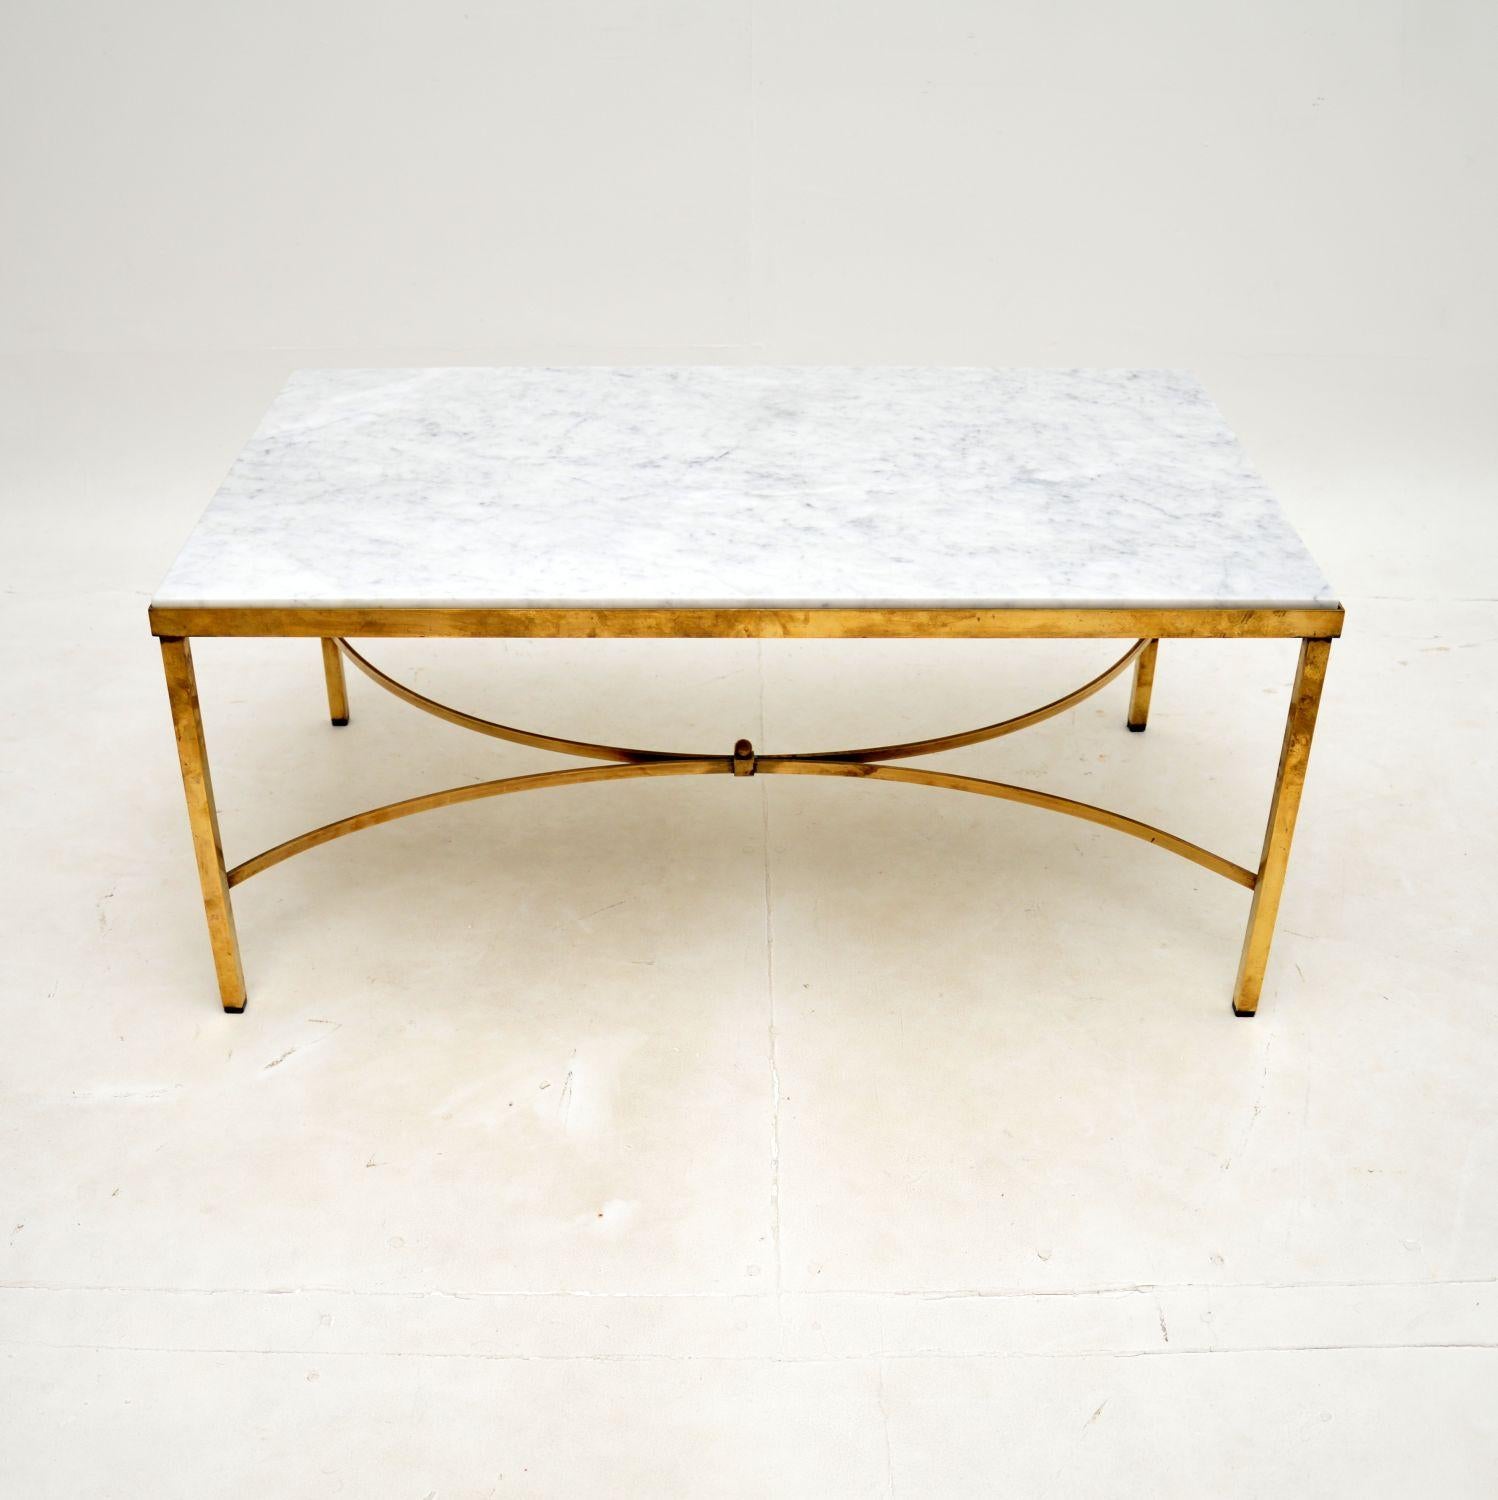 A stylish and very well made vintage French brass and marble coffee table. This was made in France in around the 1970’s.

The quality is superb, the solid brass frame has acquired a gorgeous patina over the years. It is a very useful size, and looks